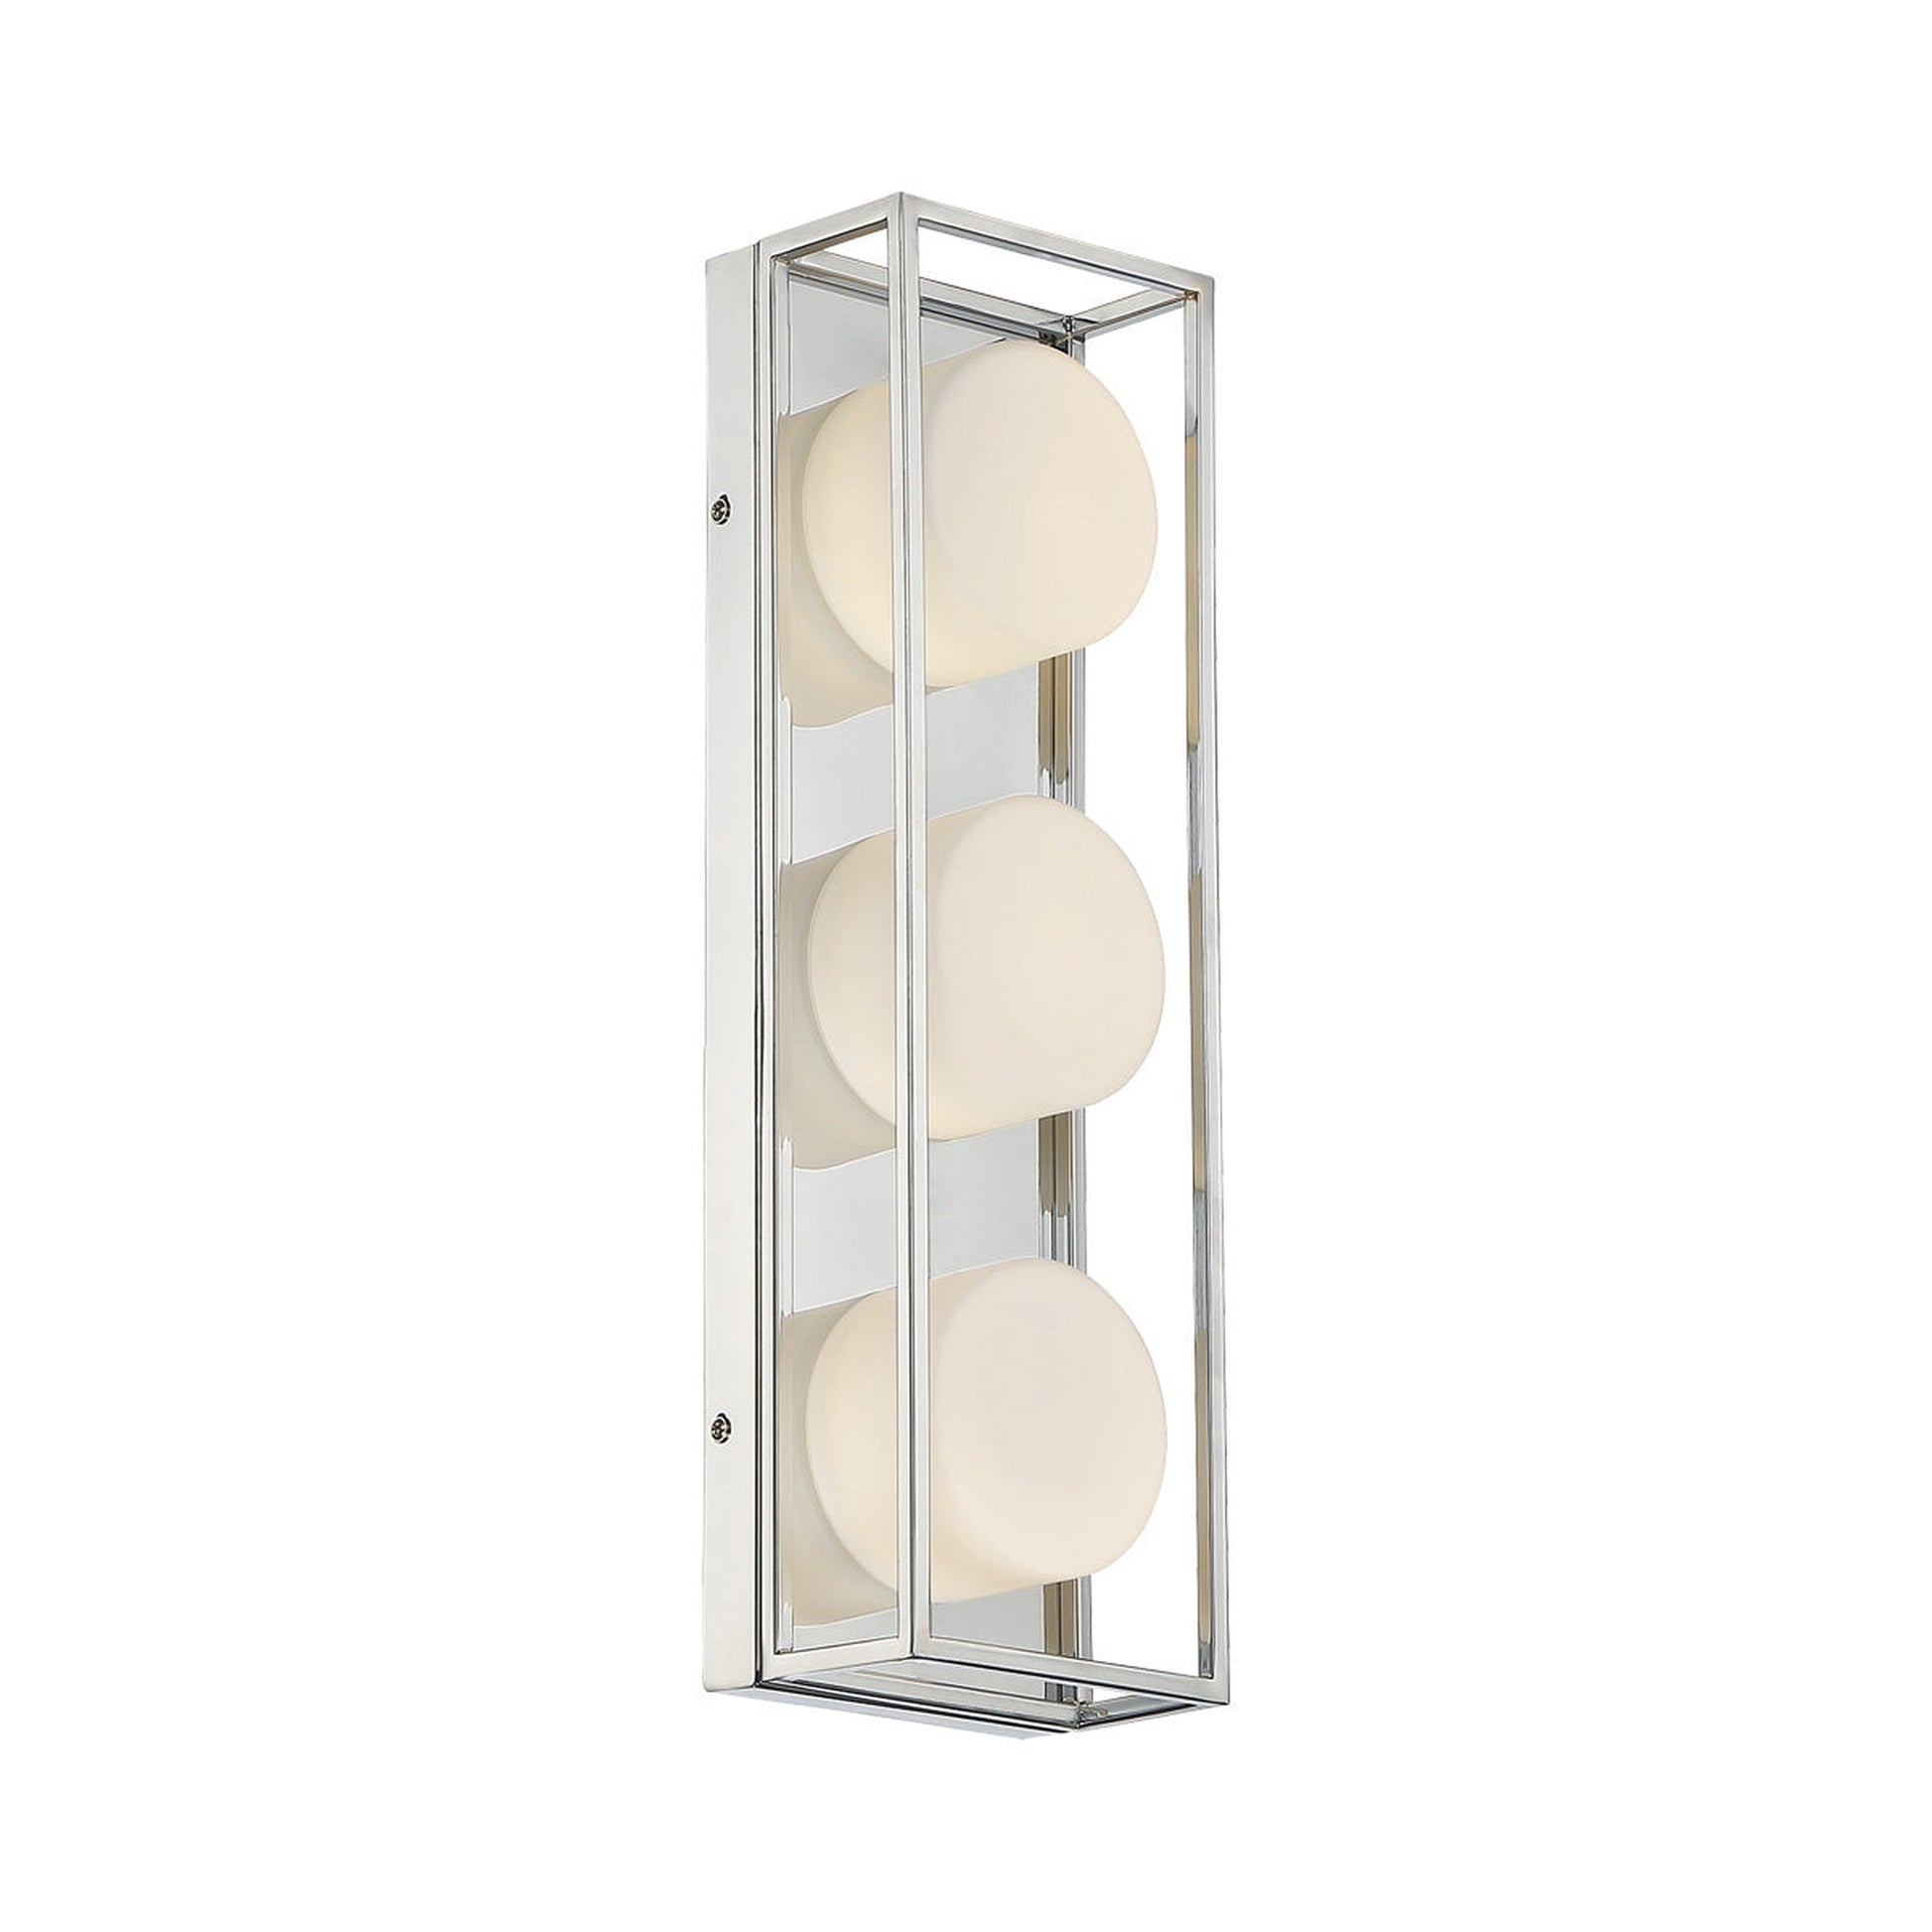 Eurofase Lighting Rover 18" 3-Light Dimmable Integrated LED Chrome Bath Bar With Opal Glass Shades